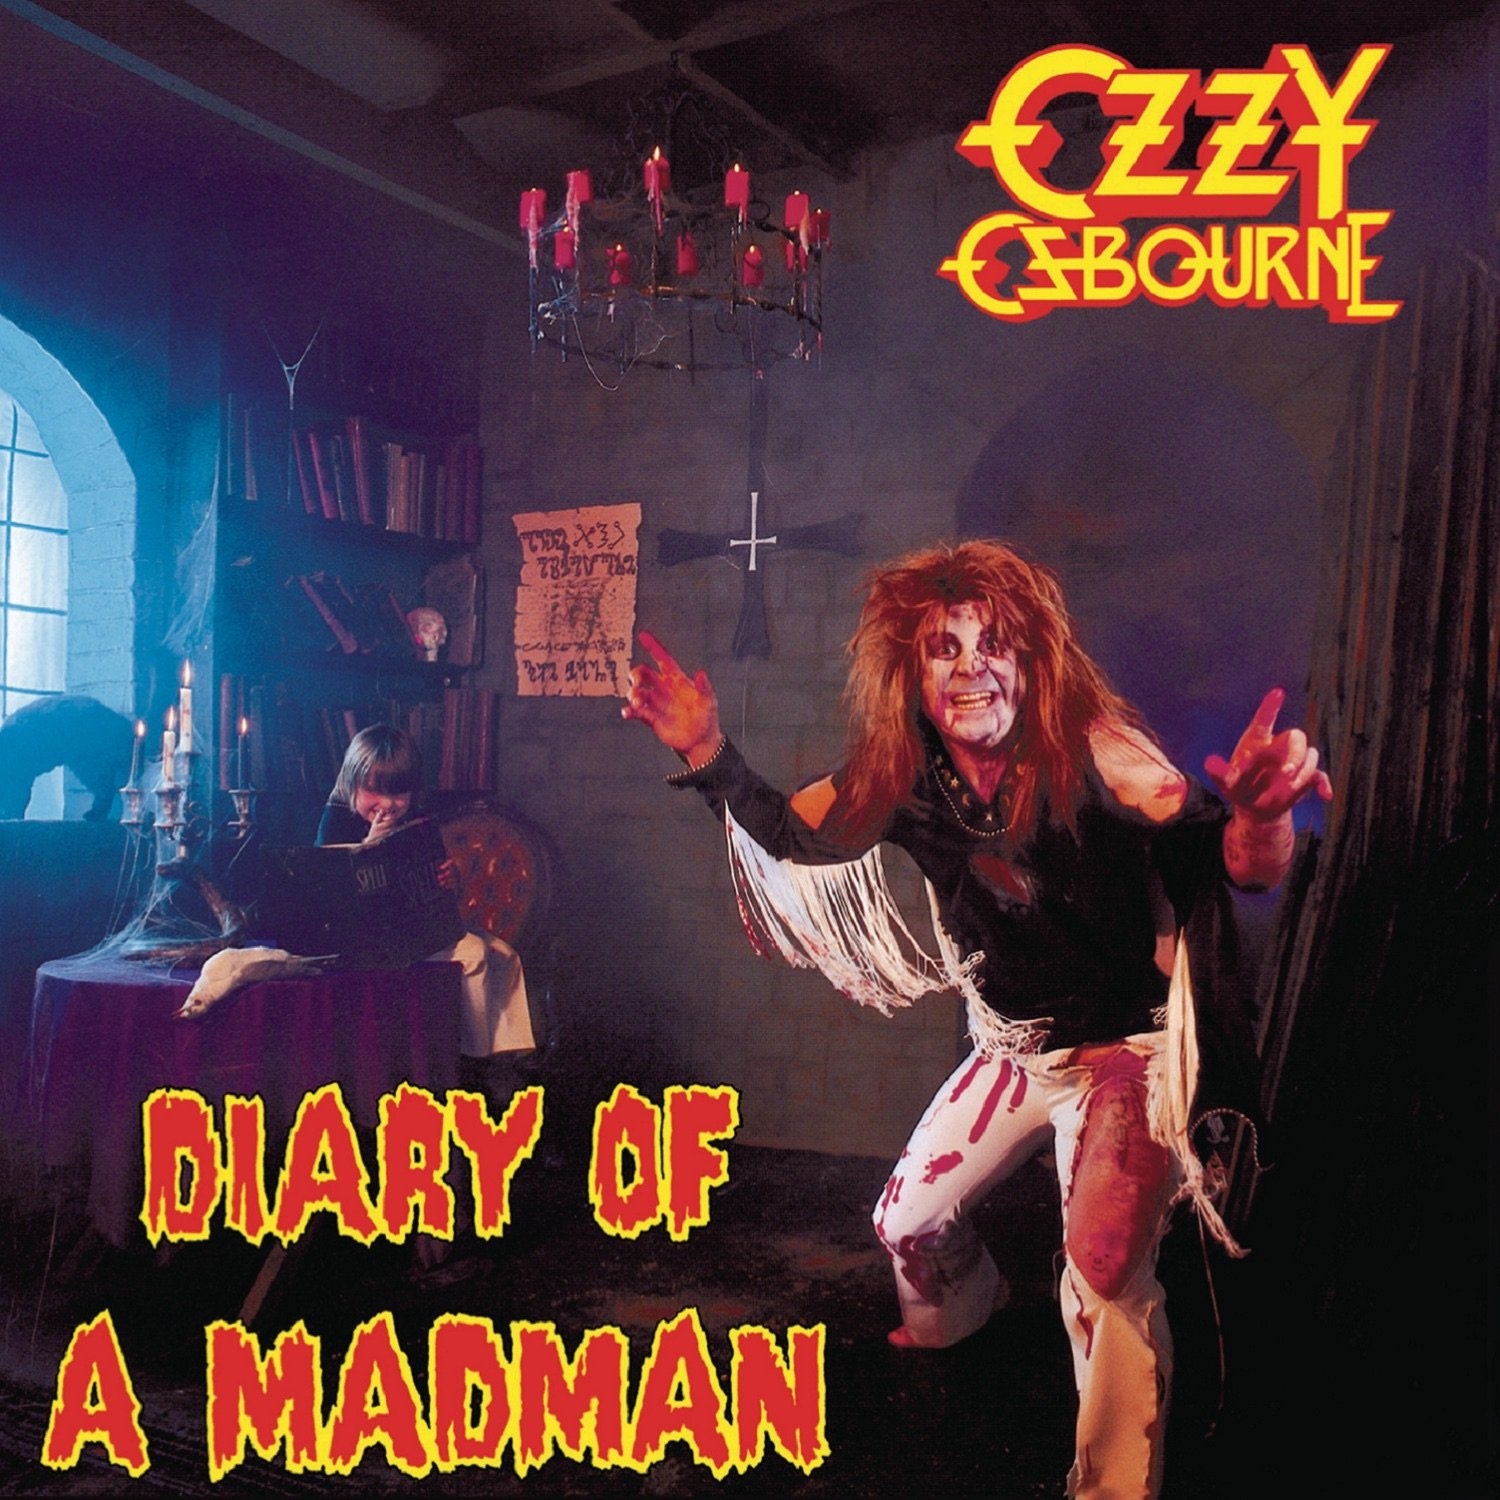 Металл Sony Osbourne, Ozzy - Diary of a Madman (40th anniversary) (Limited Marbled Vinyl) рок sony music ac dc for those about to rock we salute you limited 50th anniversary edition 180 gram gold nugget vinyl lp